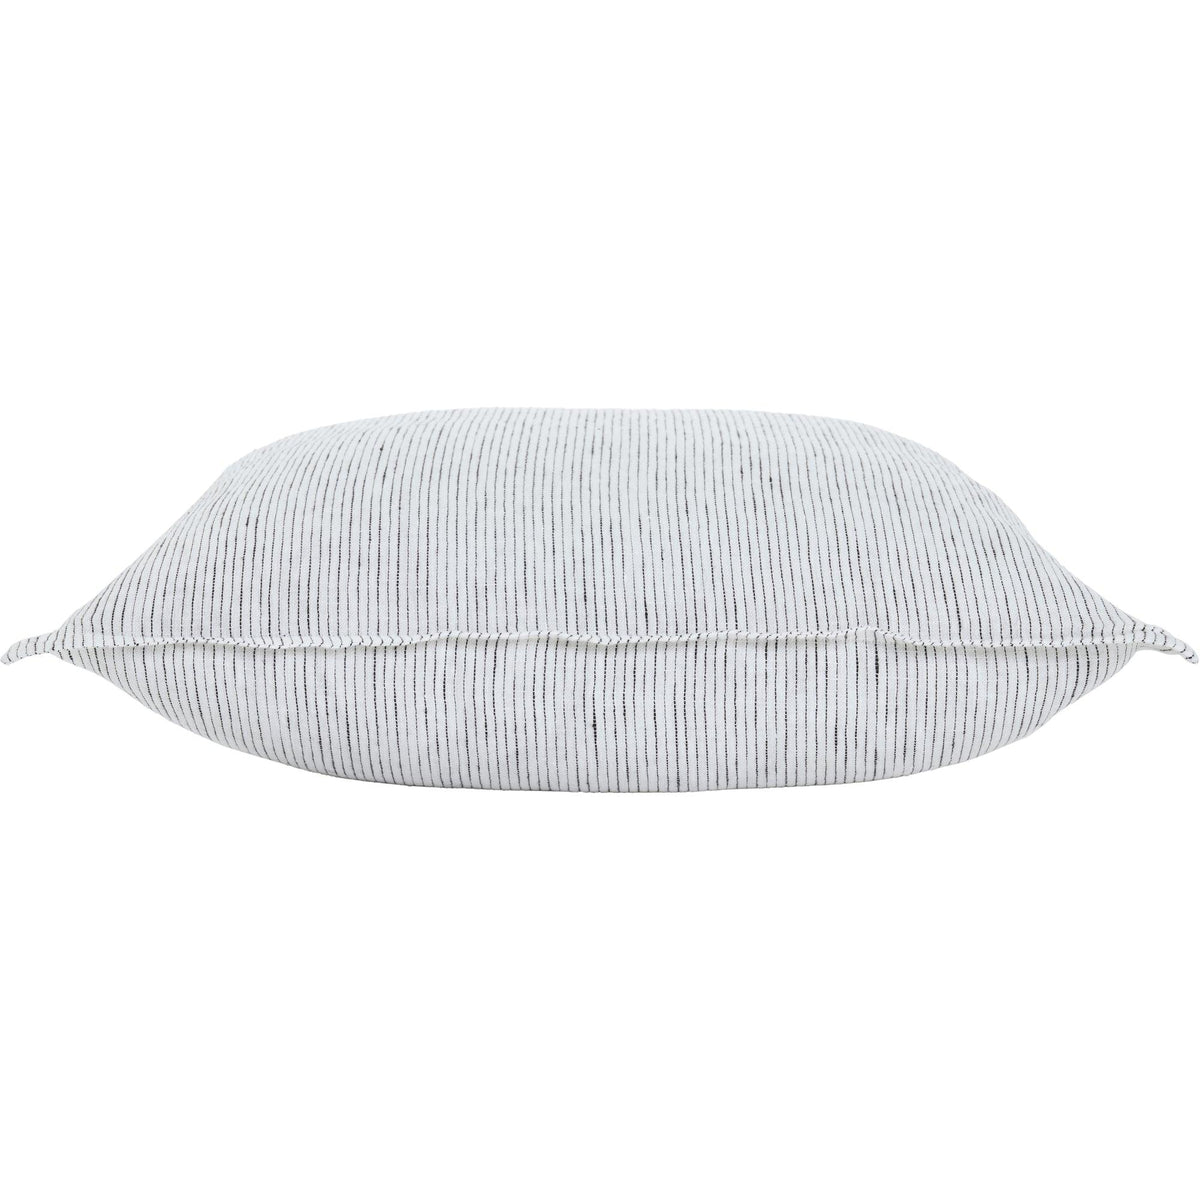 Renwil - Syden Pillow - PWFL1399 | Montreal Lighting & Hardware